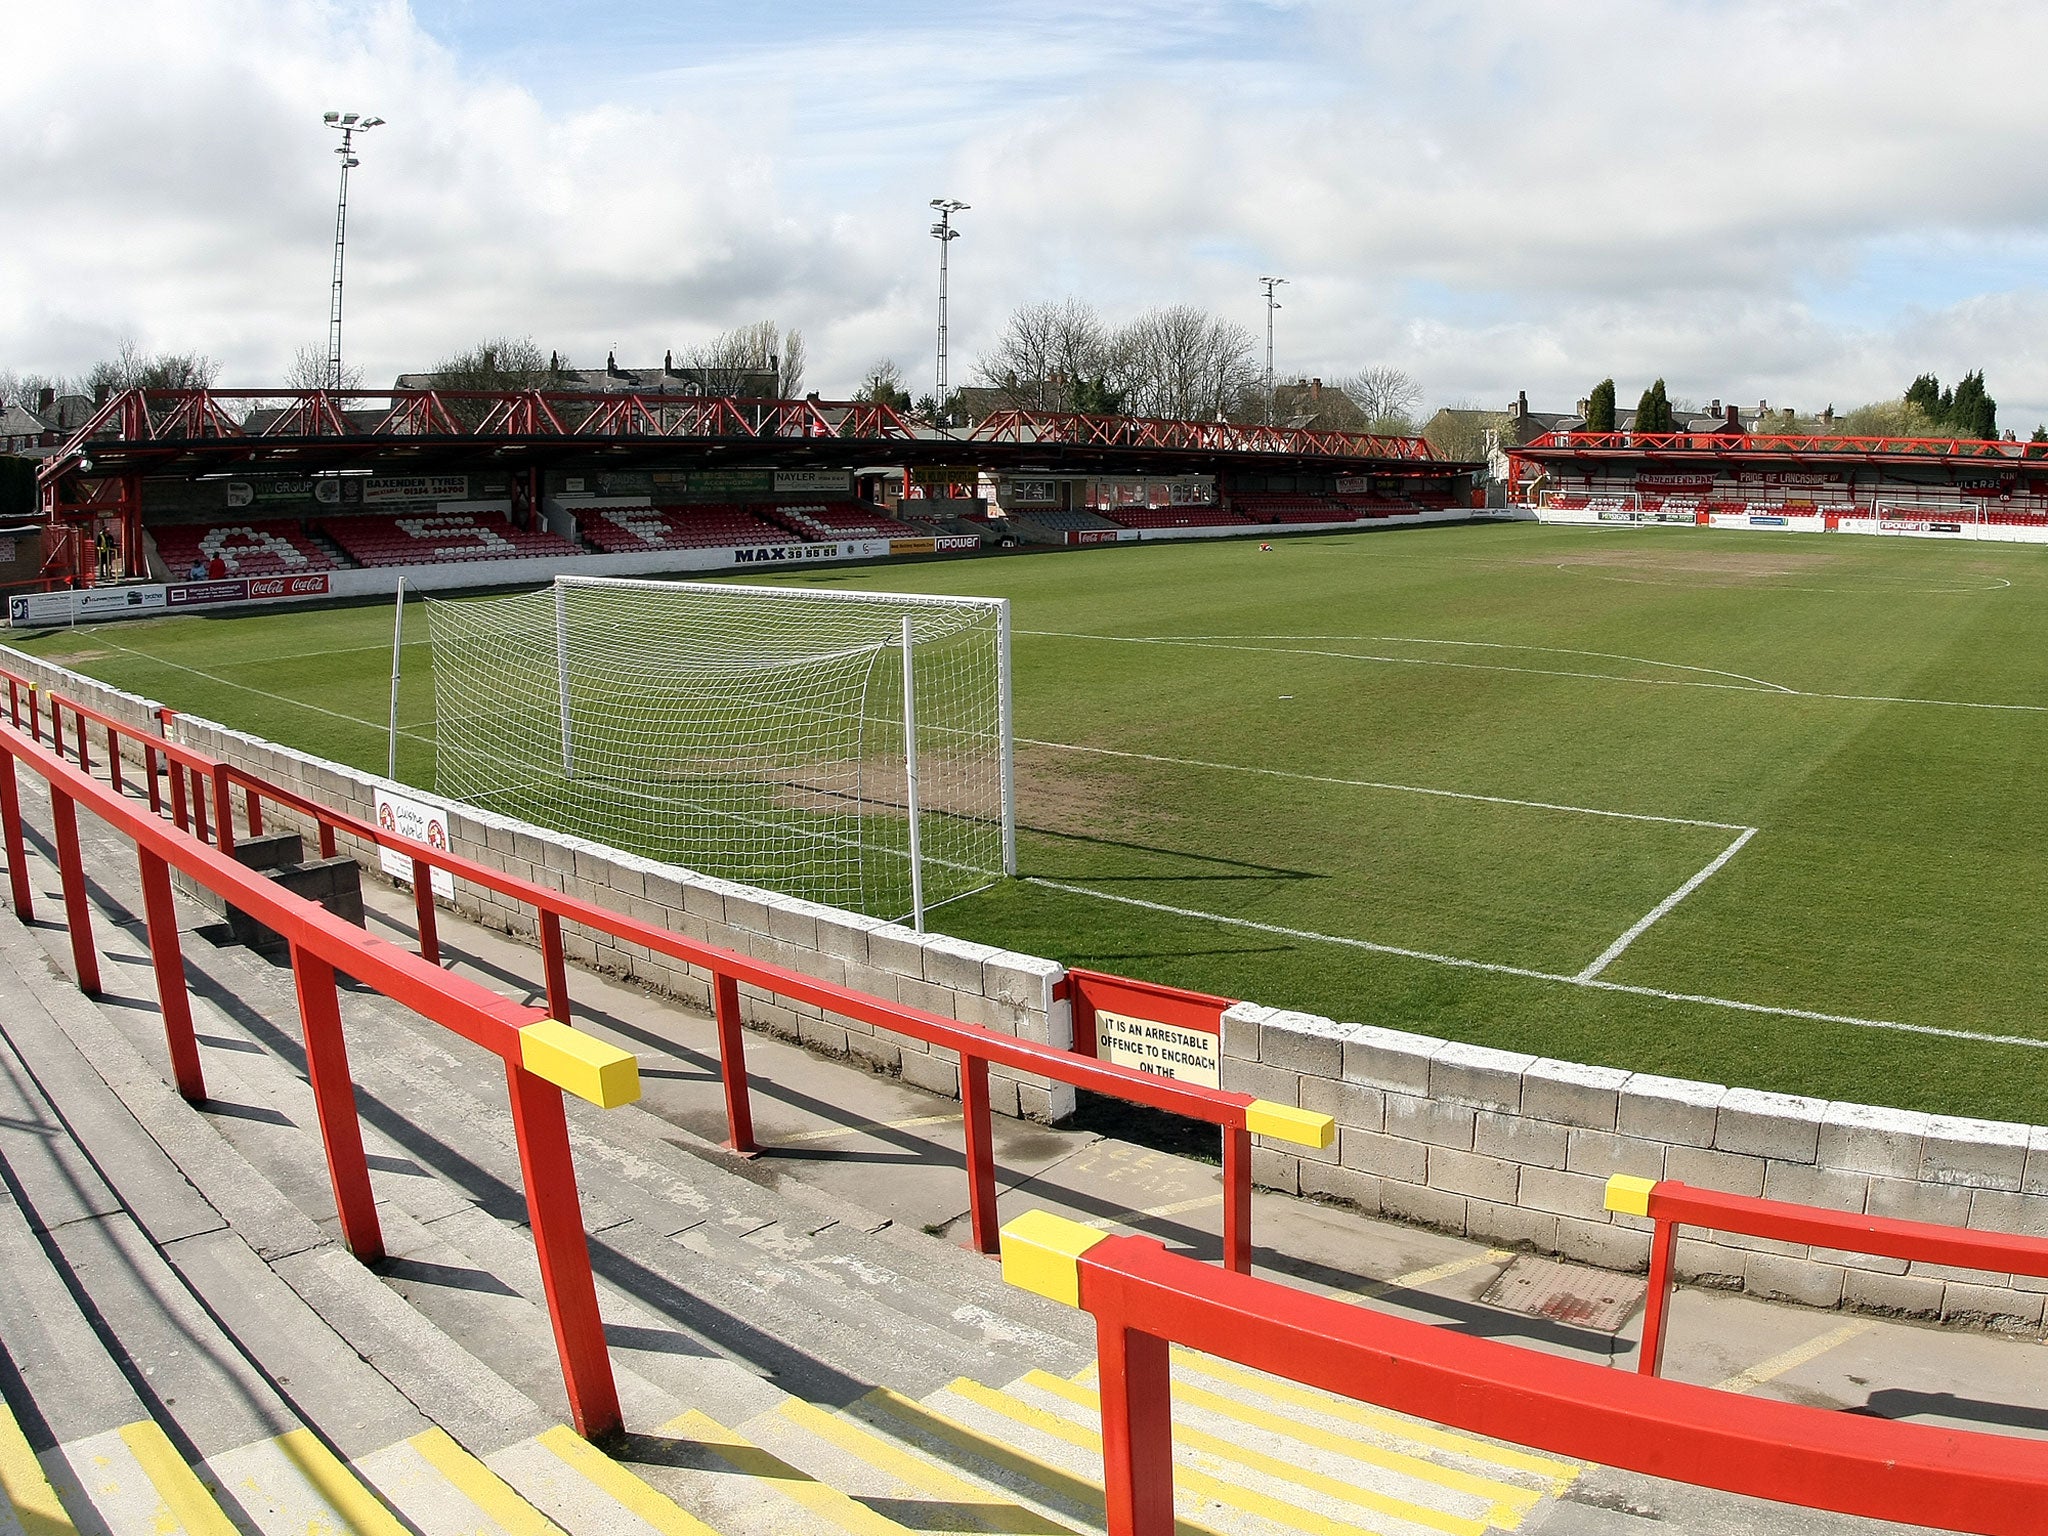 &#13;
Accrington Stanley depend on payments from the Football League&#13;